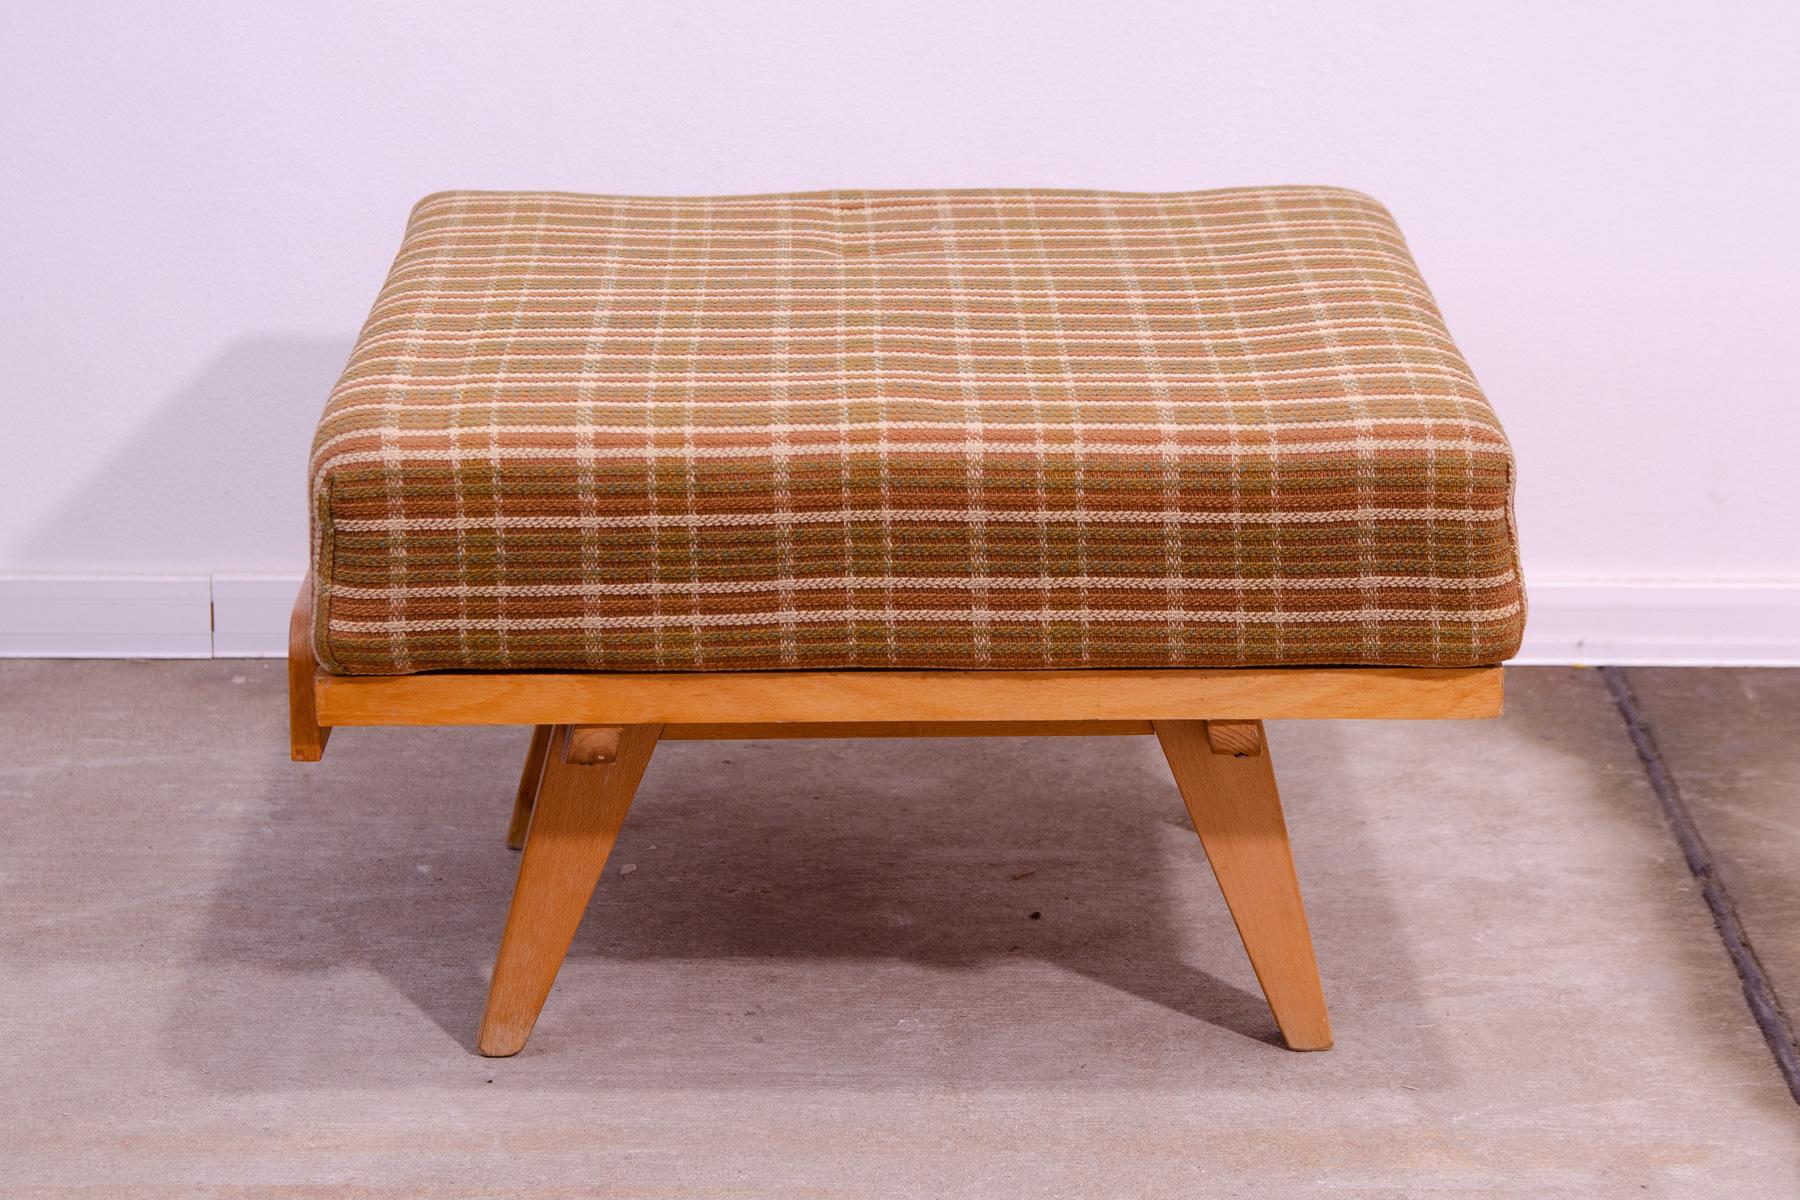 Midcentury footstool designed by Frantisek Jirak for by Tatra nabytok Pravenec, 1960´s. Made in the former Czechoslovakia.
Very stylish and modern design. In very good vintage condition,  shows slight signs of age and using.

Dimensions:

Height: 42